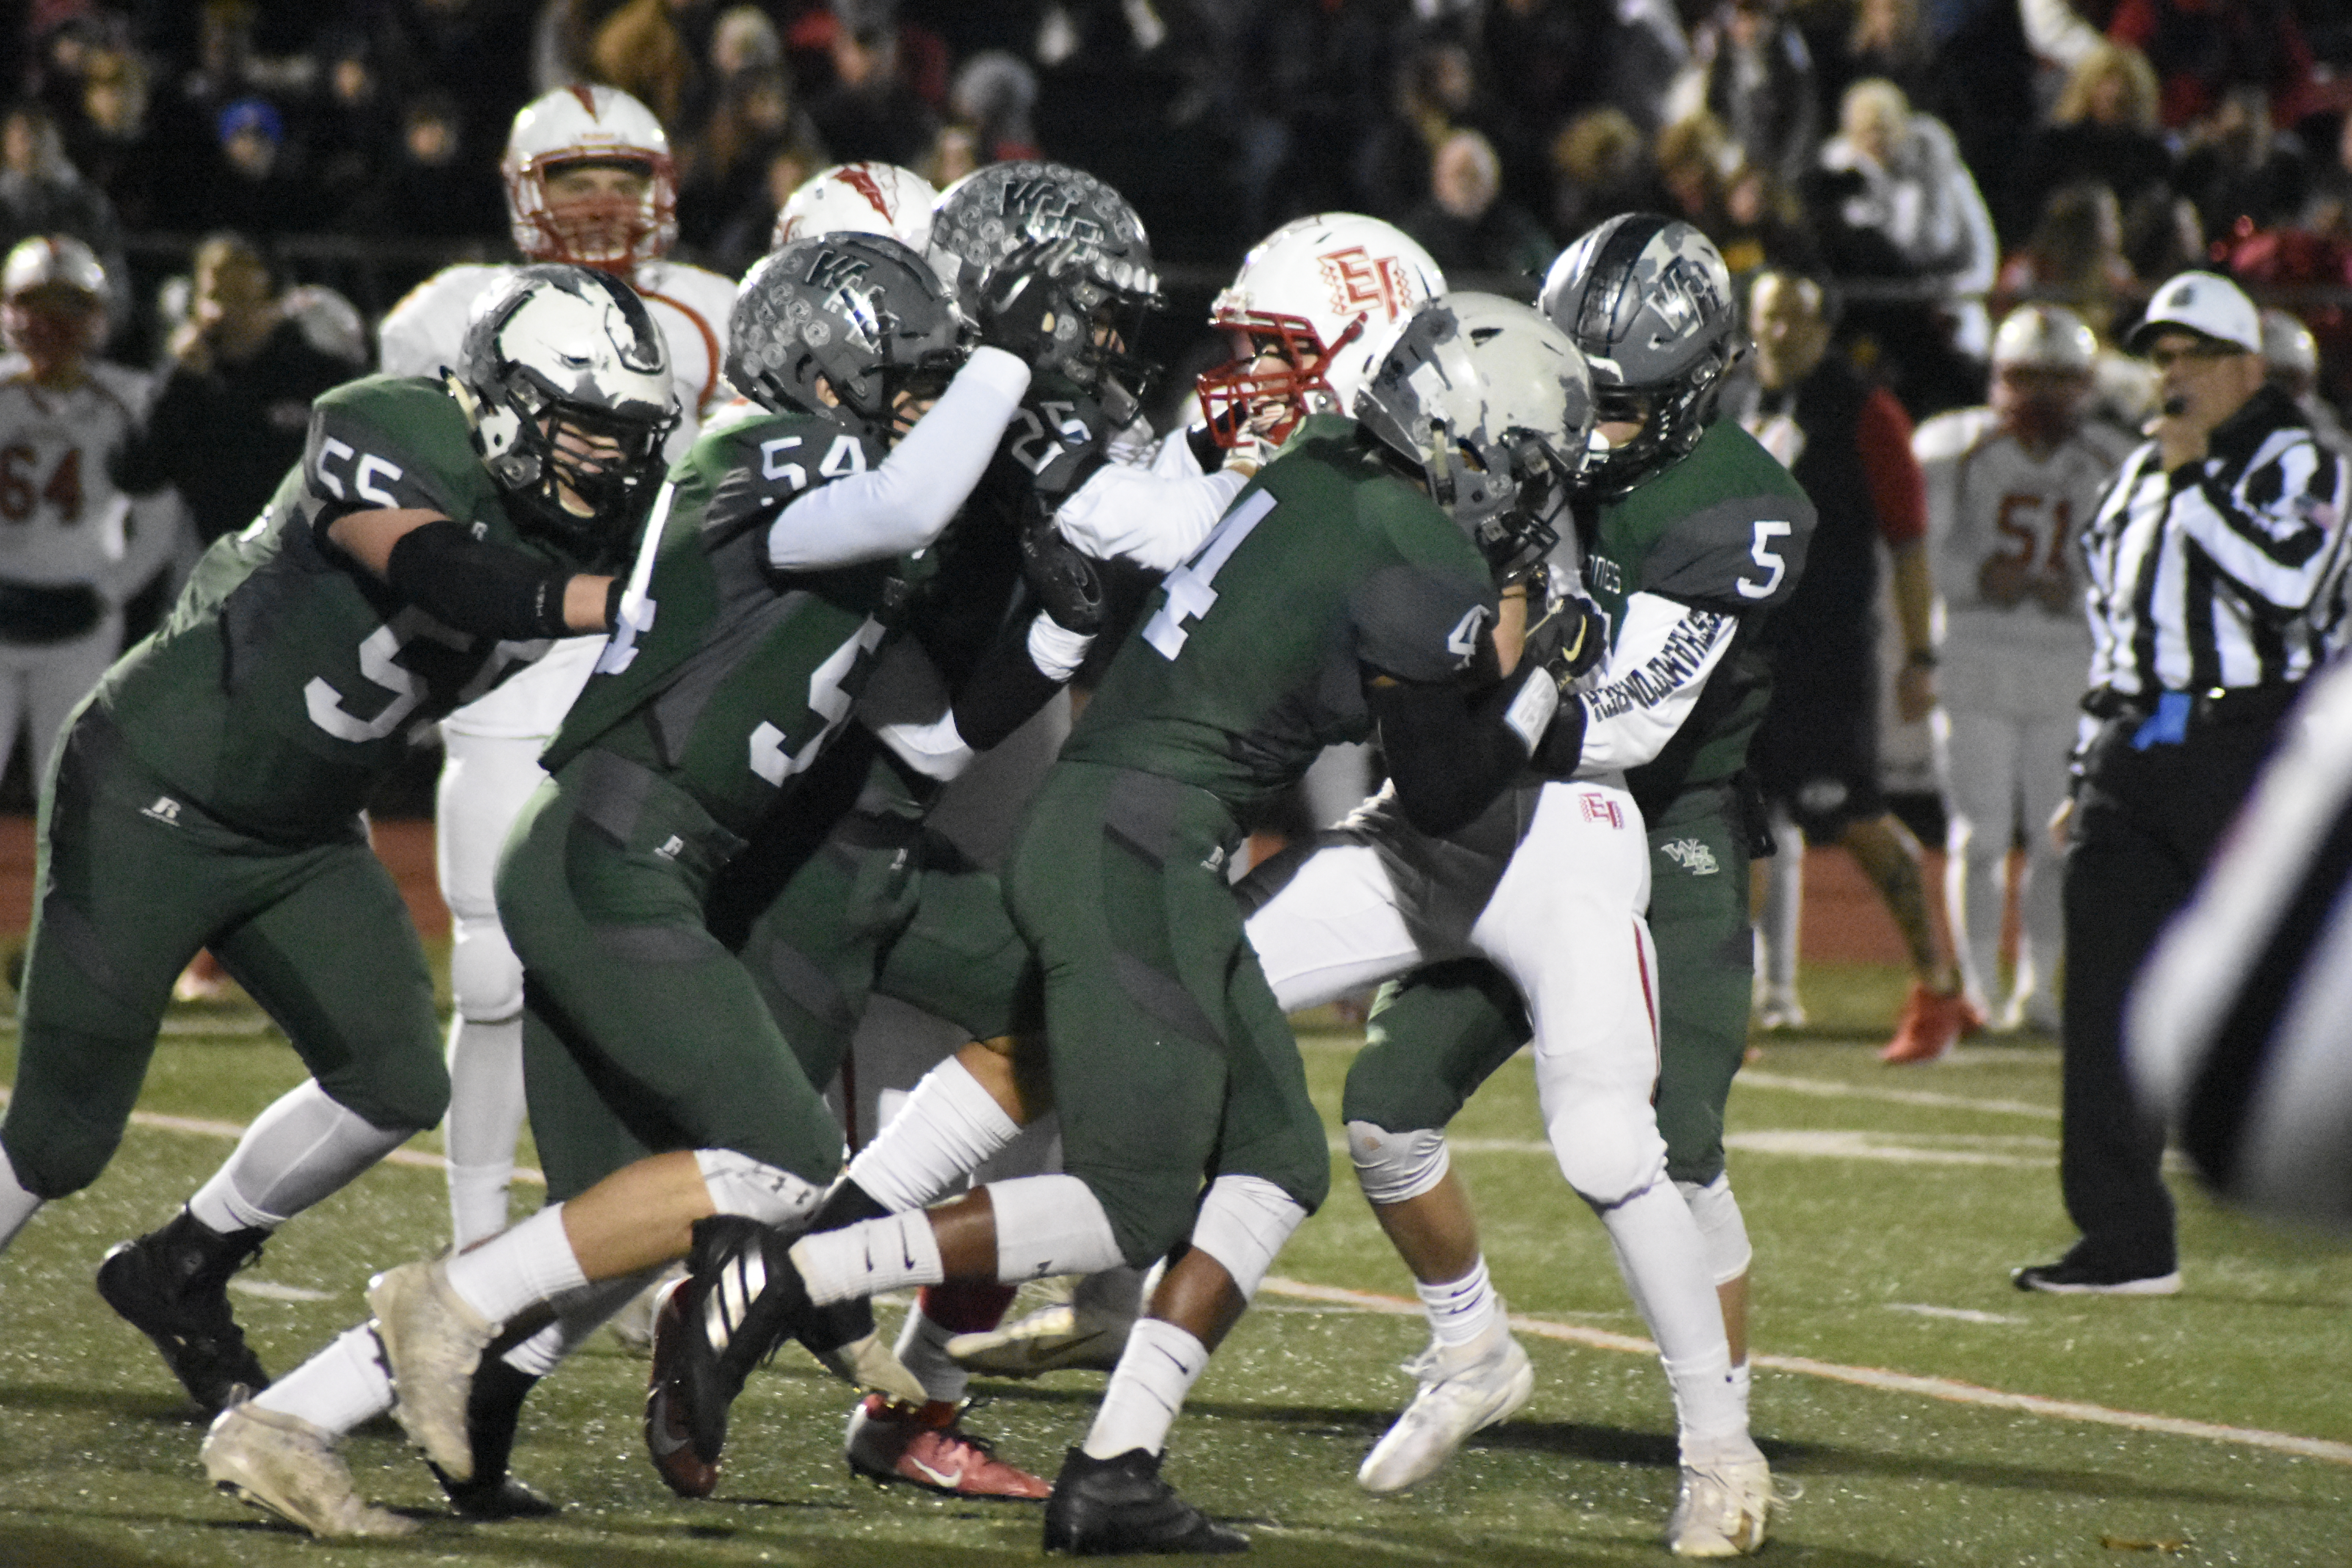 Matt Leotta (5), Shavar Coffey (4) and a host of other 'Canes get to an East Islip player.